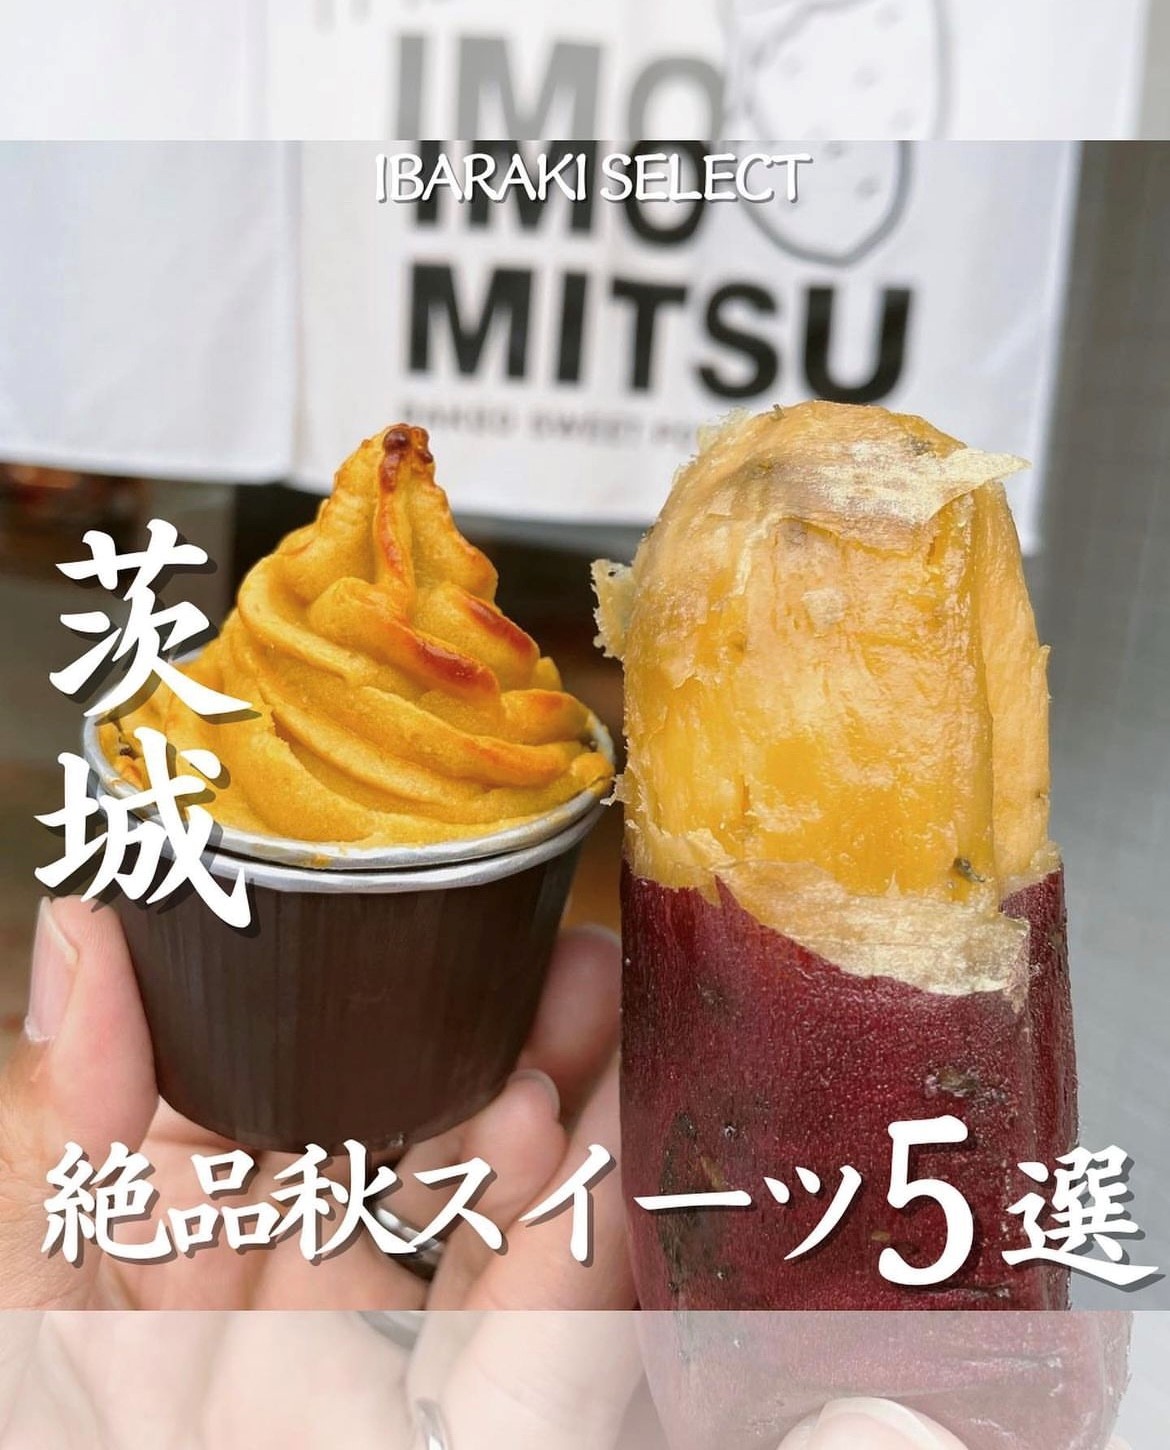  festival opening great special price freezing roasting corm Ibaraki prefecture production preeminence goods . is ..M size sweet potato no addition gift free shipping 2kg roasting .. roasting corm 